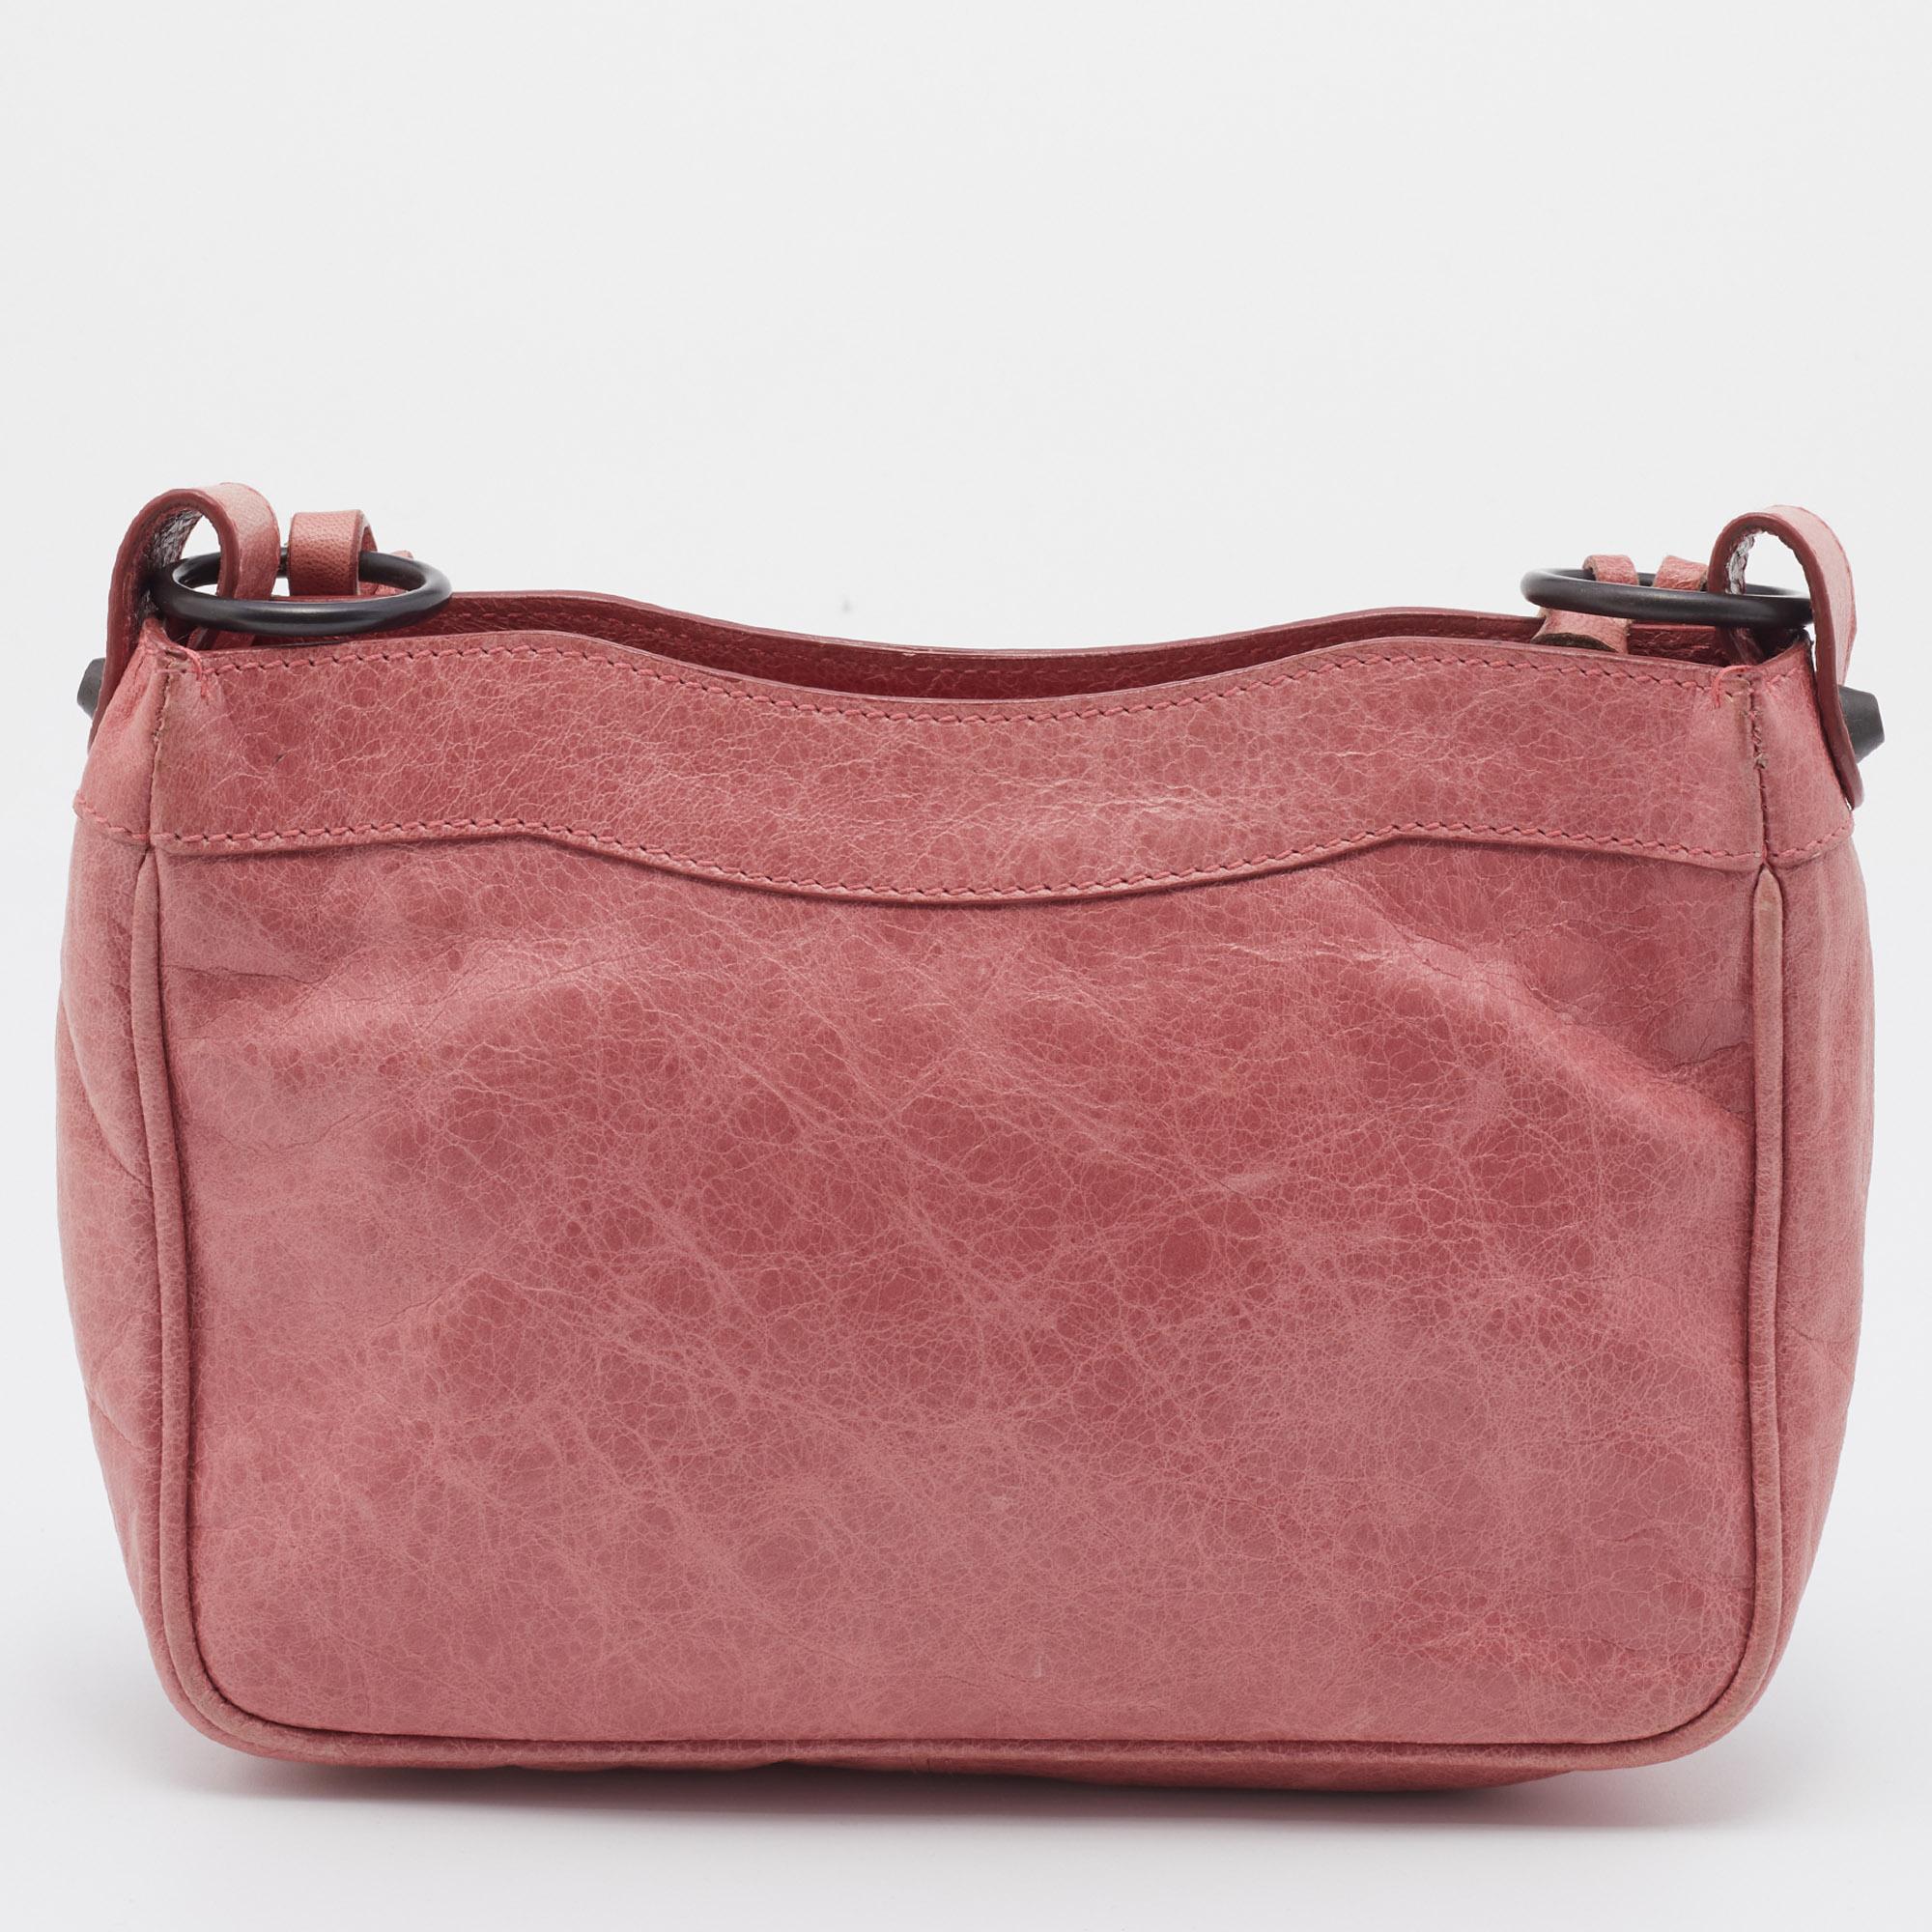 This Balenciaga handbag is an example of the brand's fine designs that are skillfully crafted to project a classic charm. The bag is made of pink leather and added with bronze-tone hardware, a short handle, and a lined interior.

Includes: Mirror